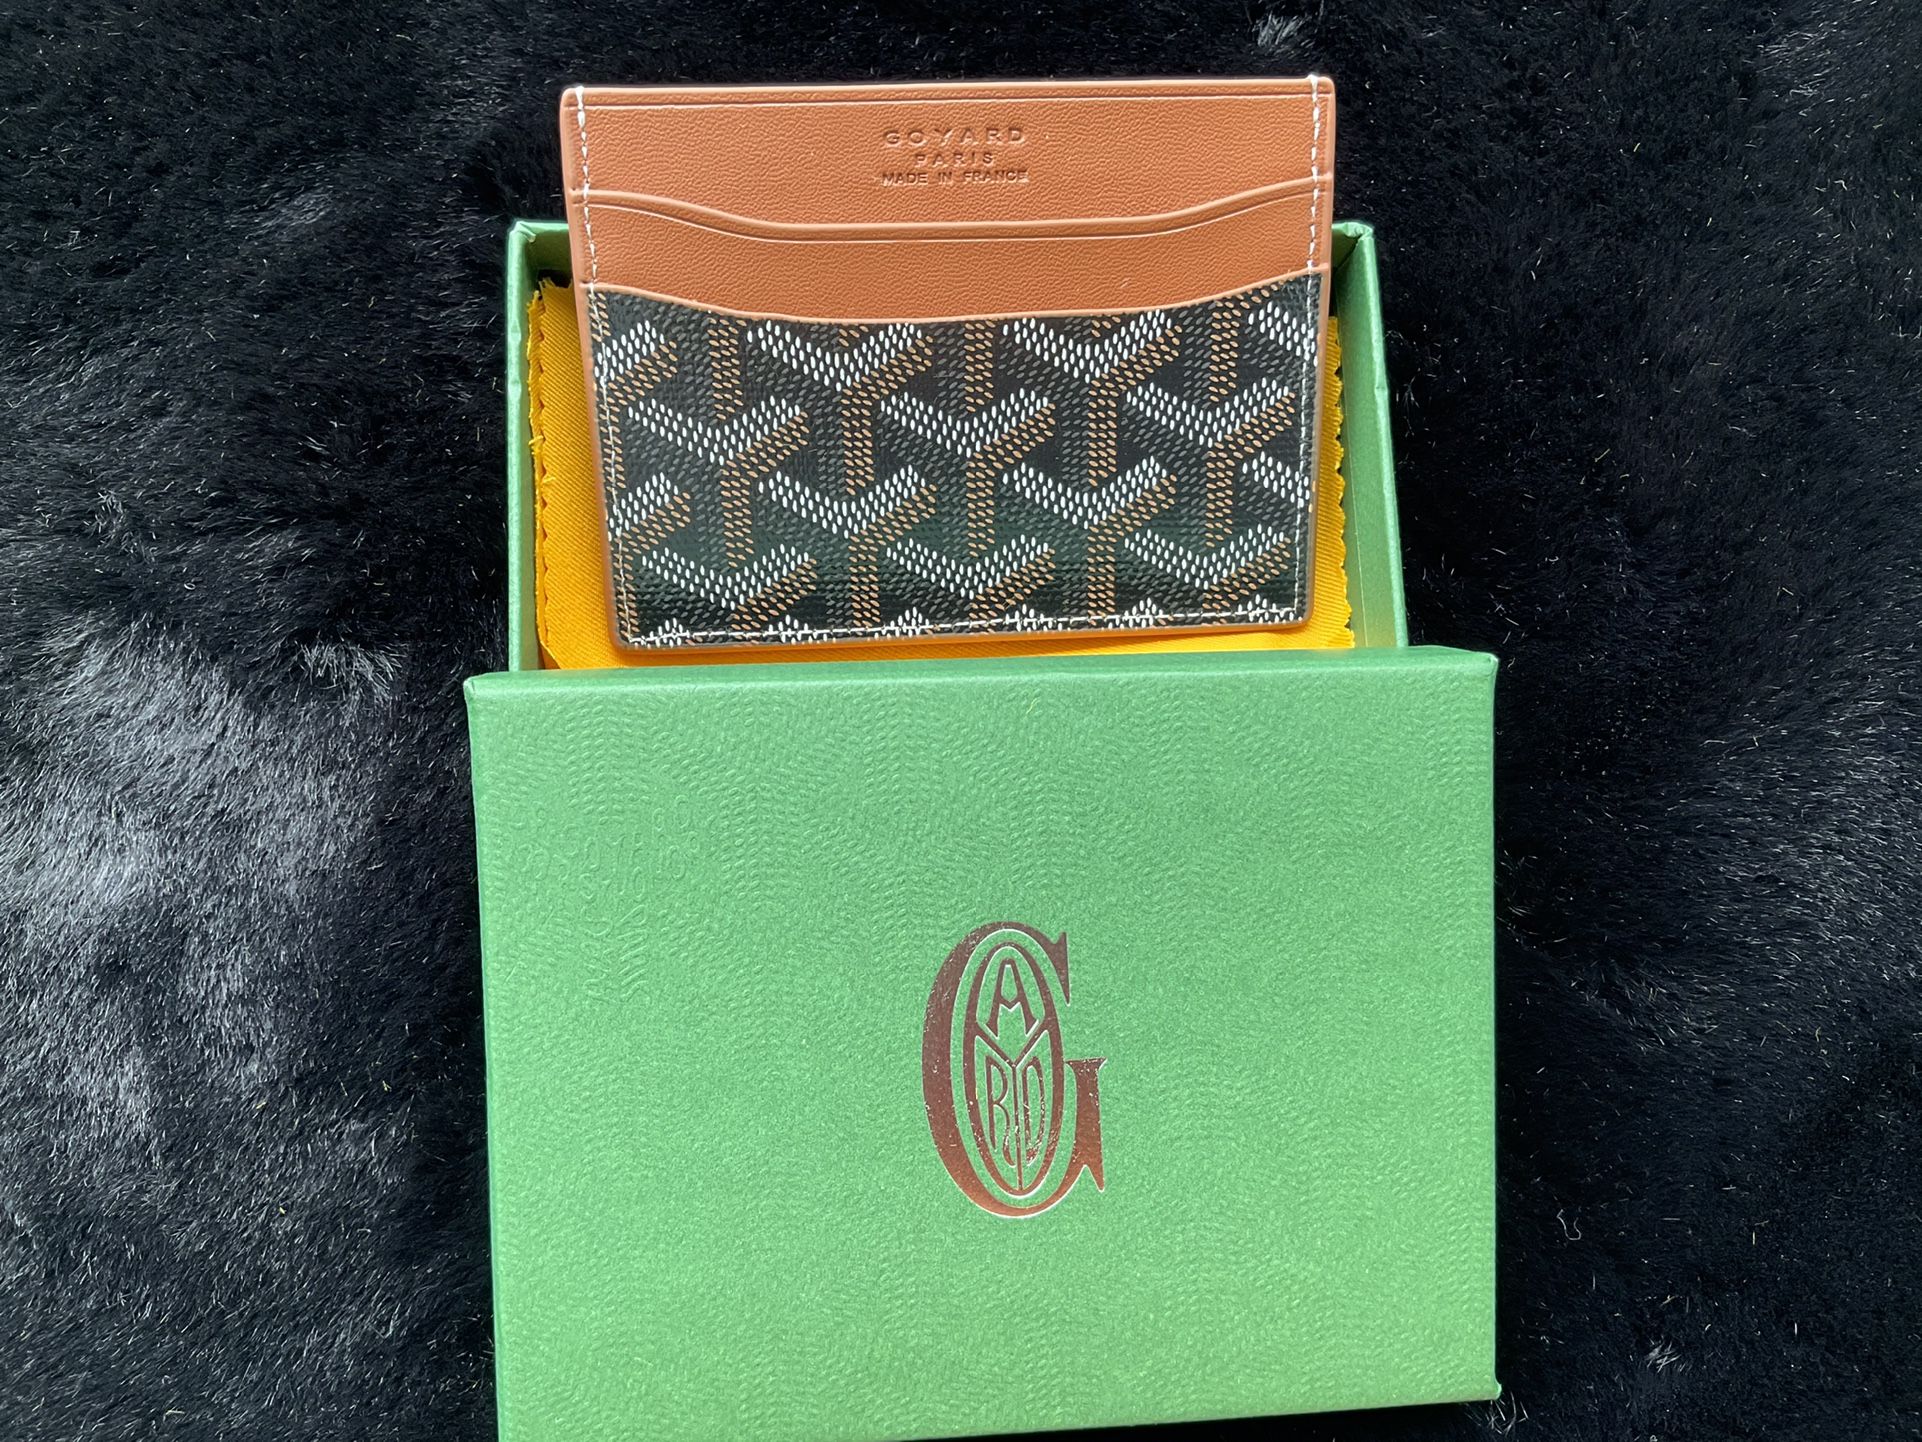 Gucci Wallets for Sale in Orlando, FL - OfferUp